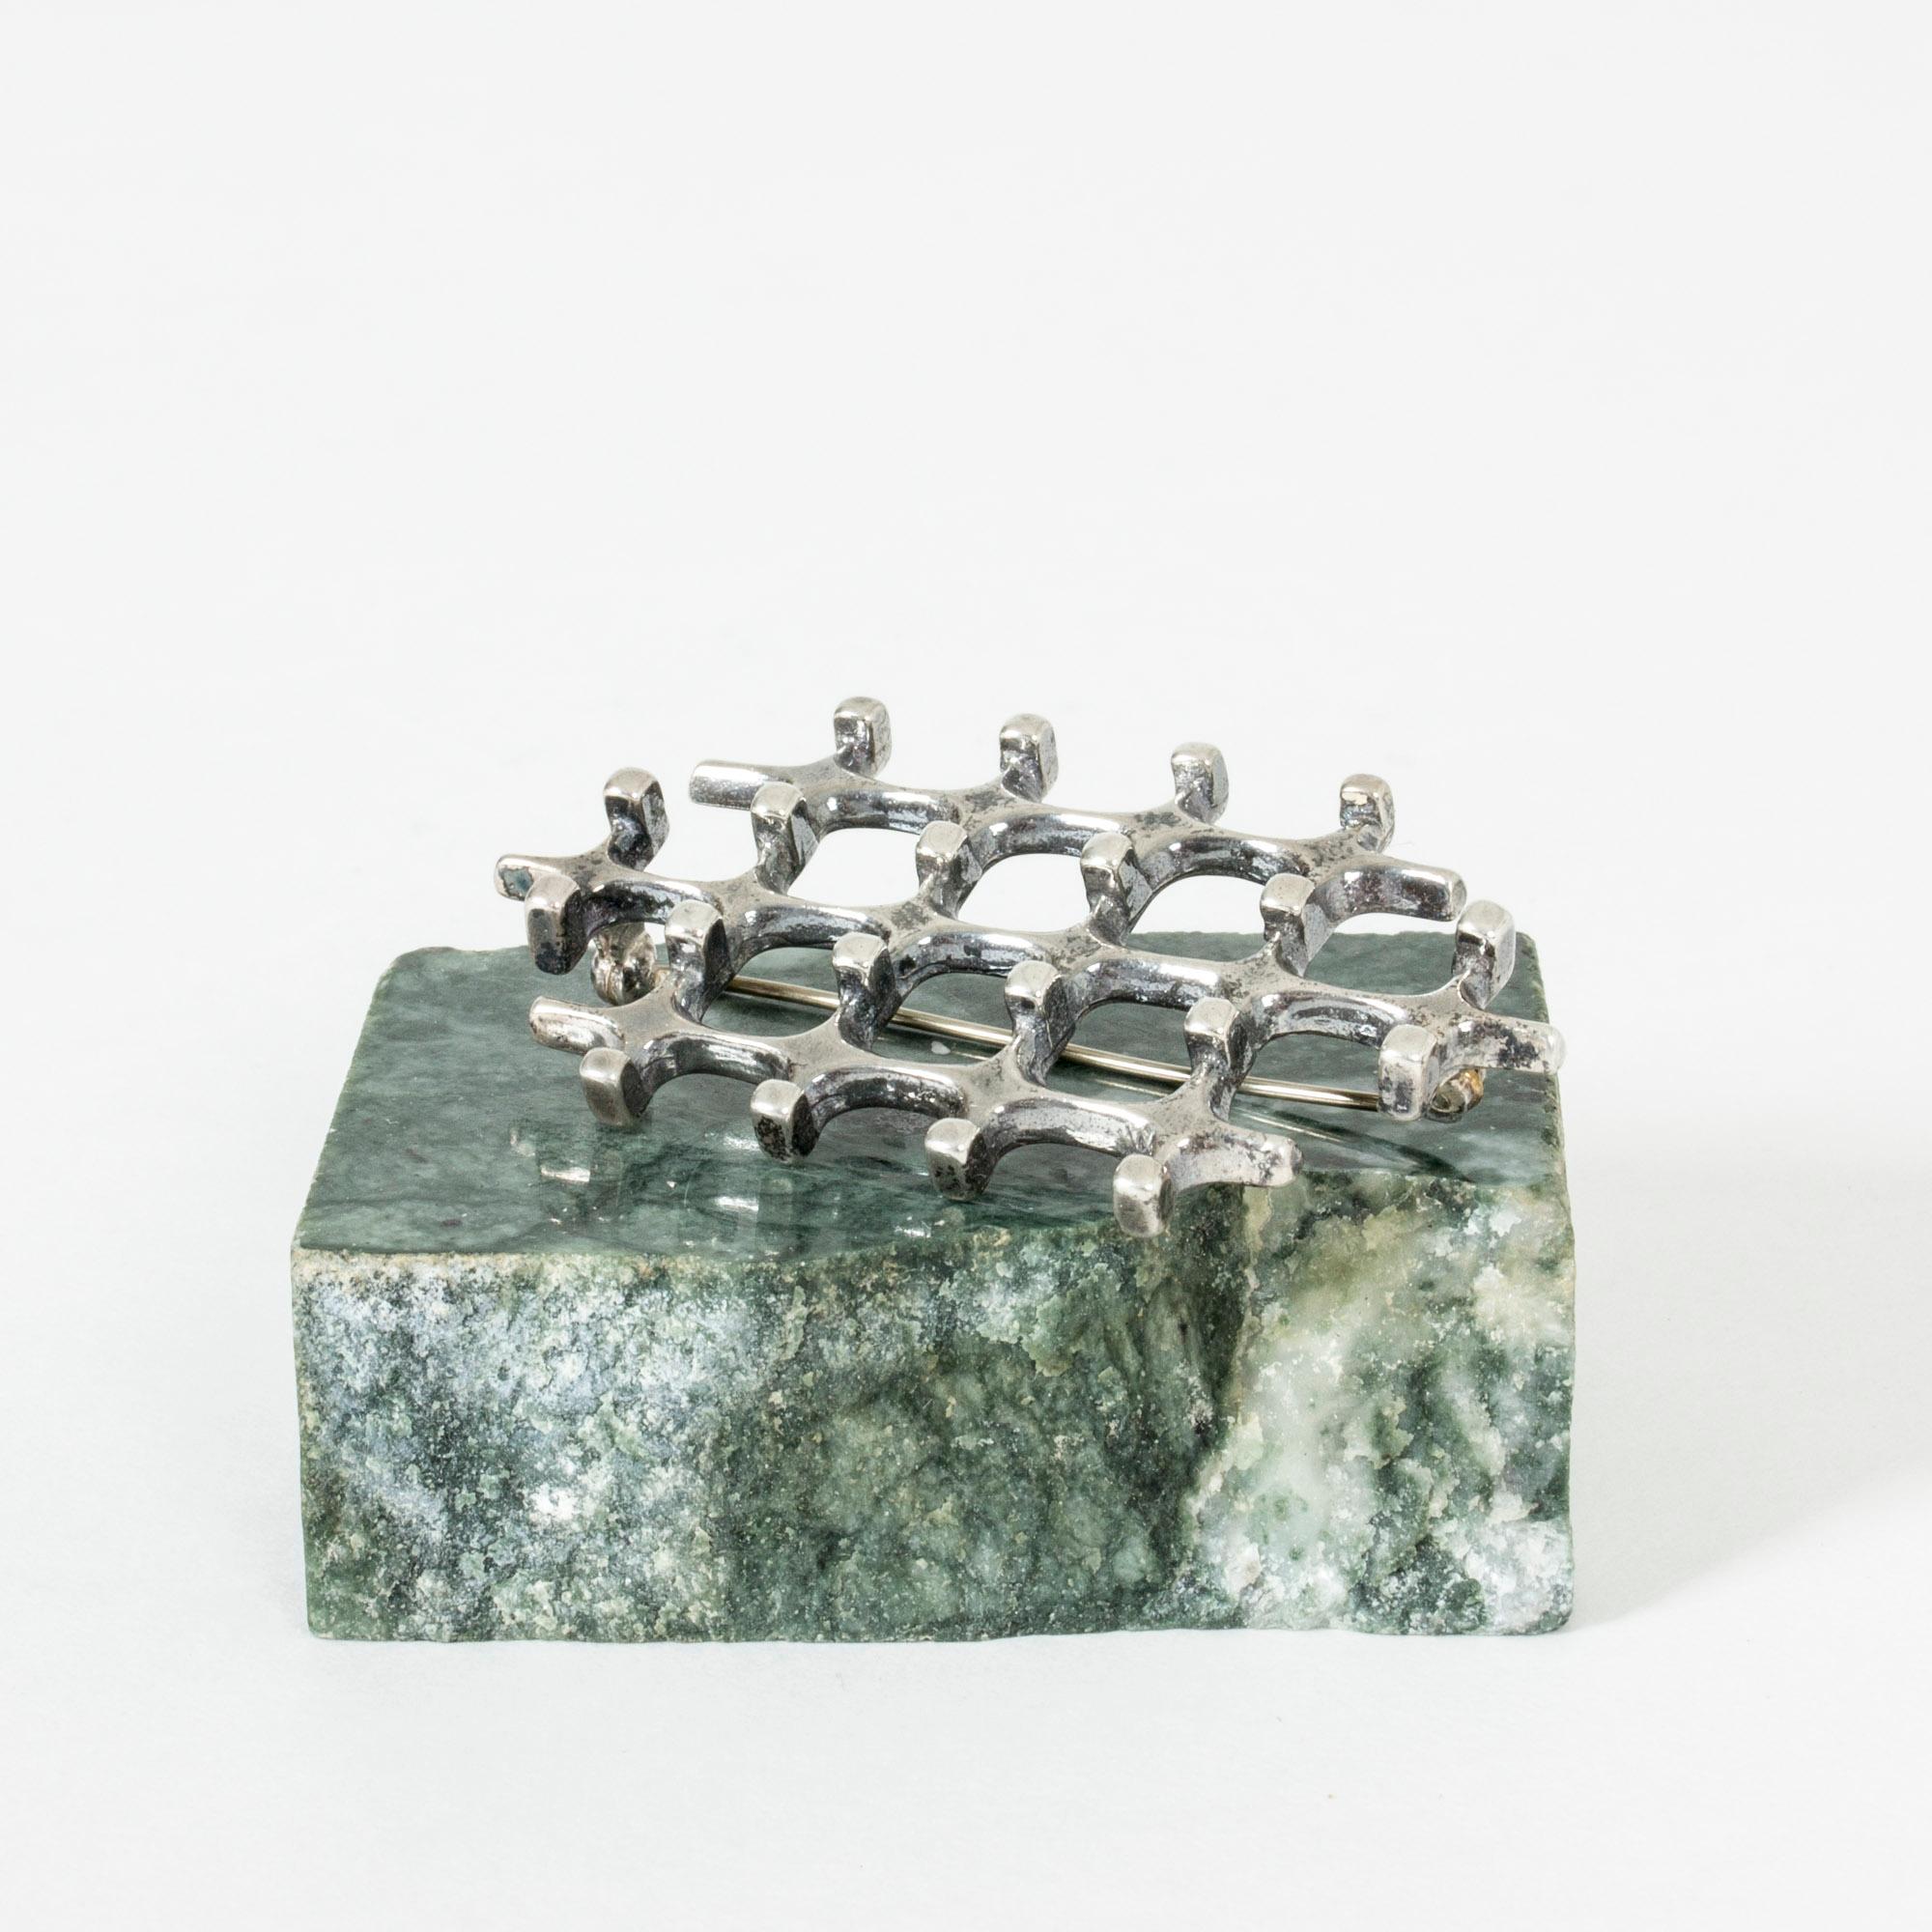 Striking geometric silver brooch by Marianne Berg. Heavy silver quality and rounded corners contrasting with the strict lines.

Dimensions: Length 5.8 cm, width 3.2 cm